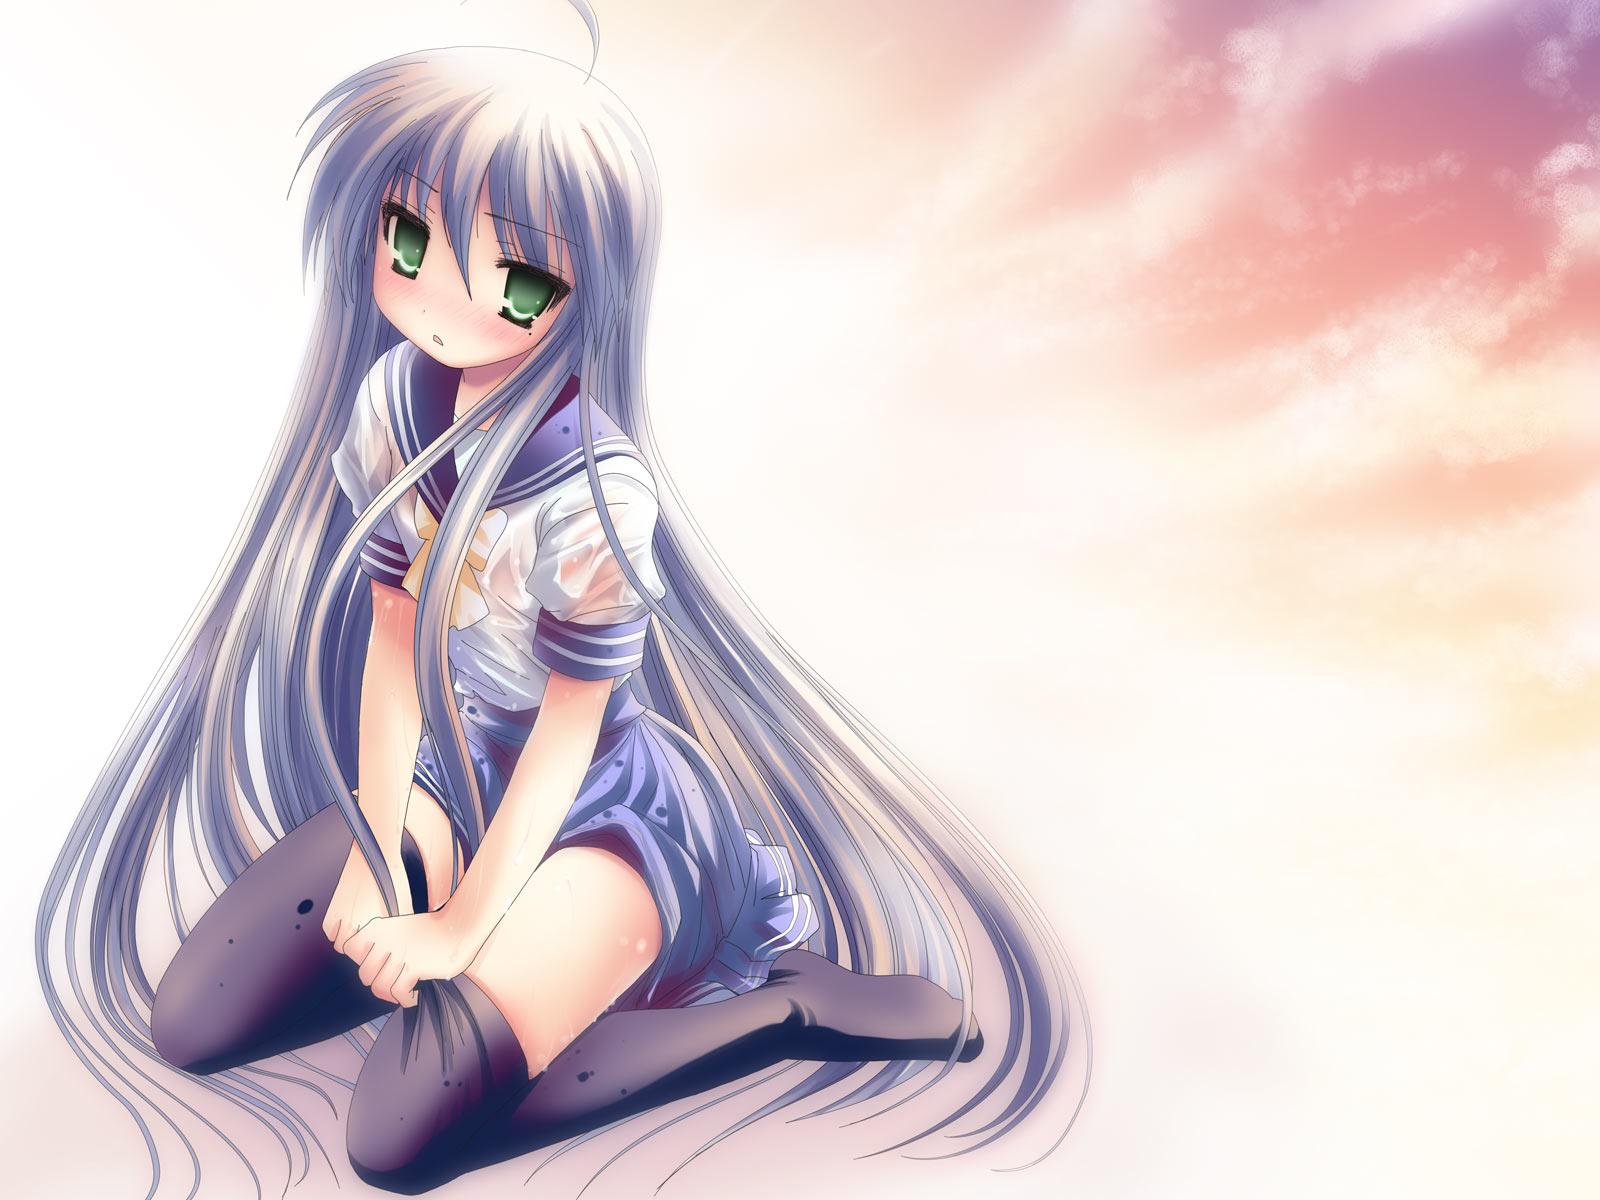 Cool And Cute Anime Girl Wallpapers - Wallpaper Cave